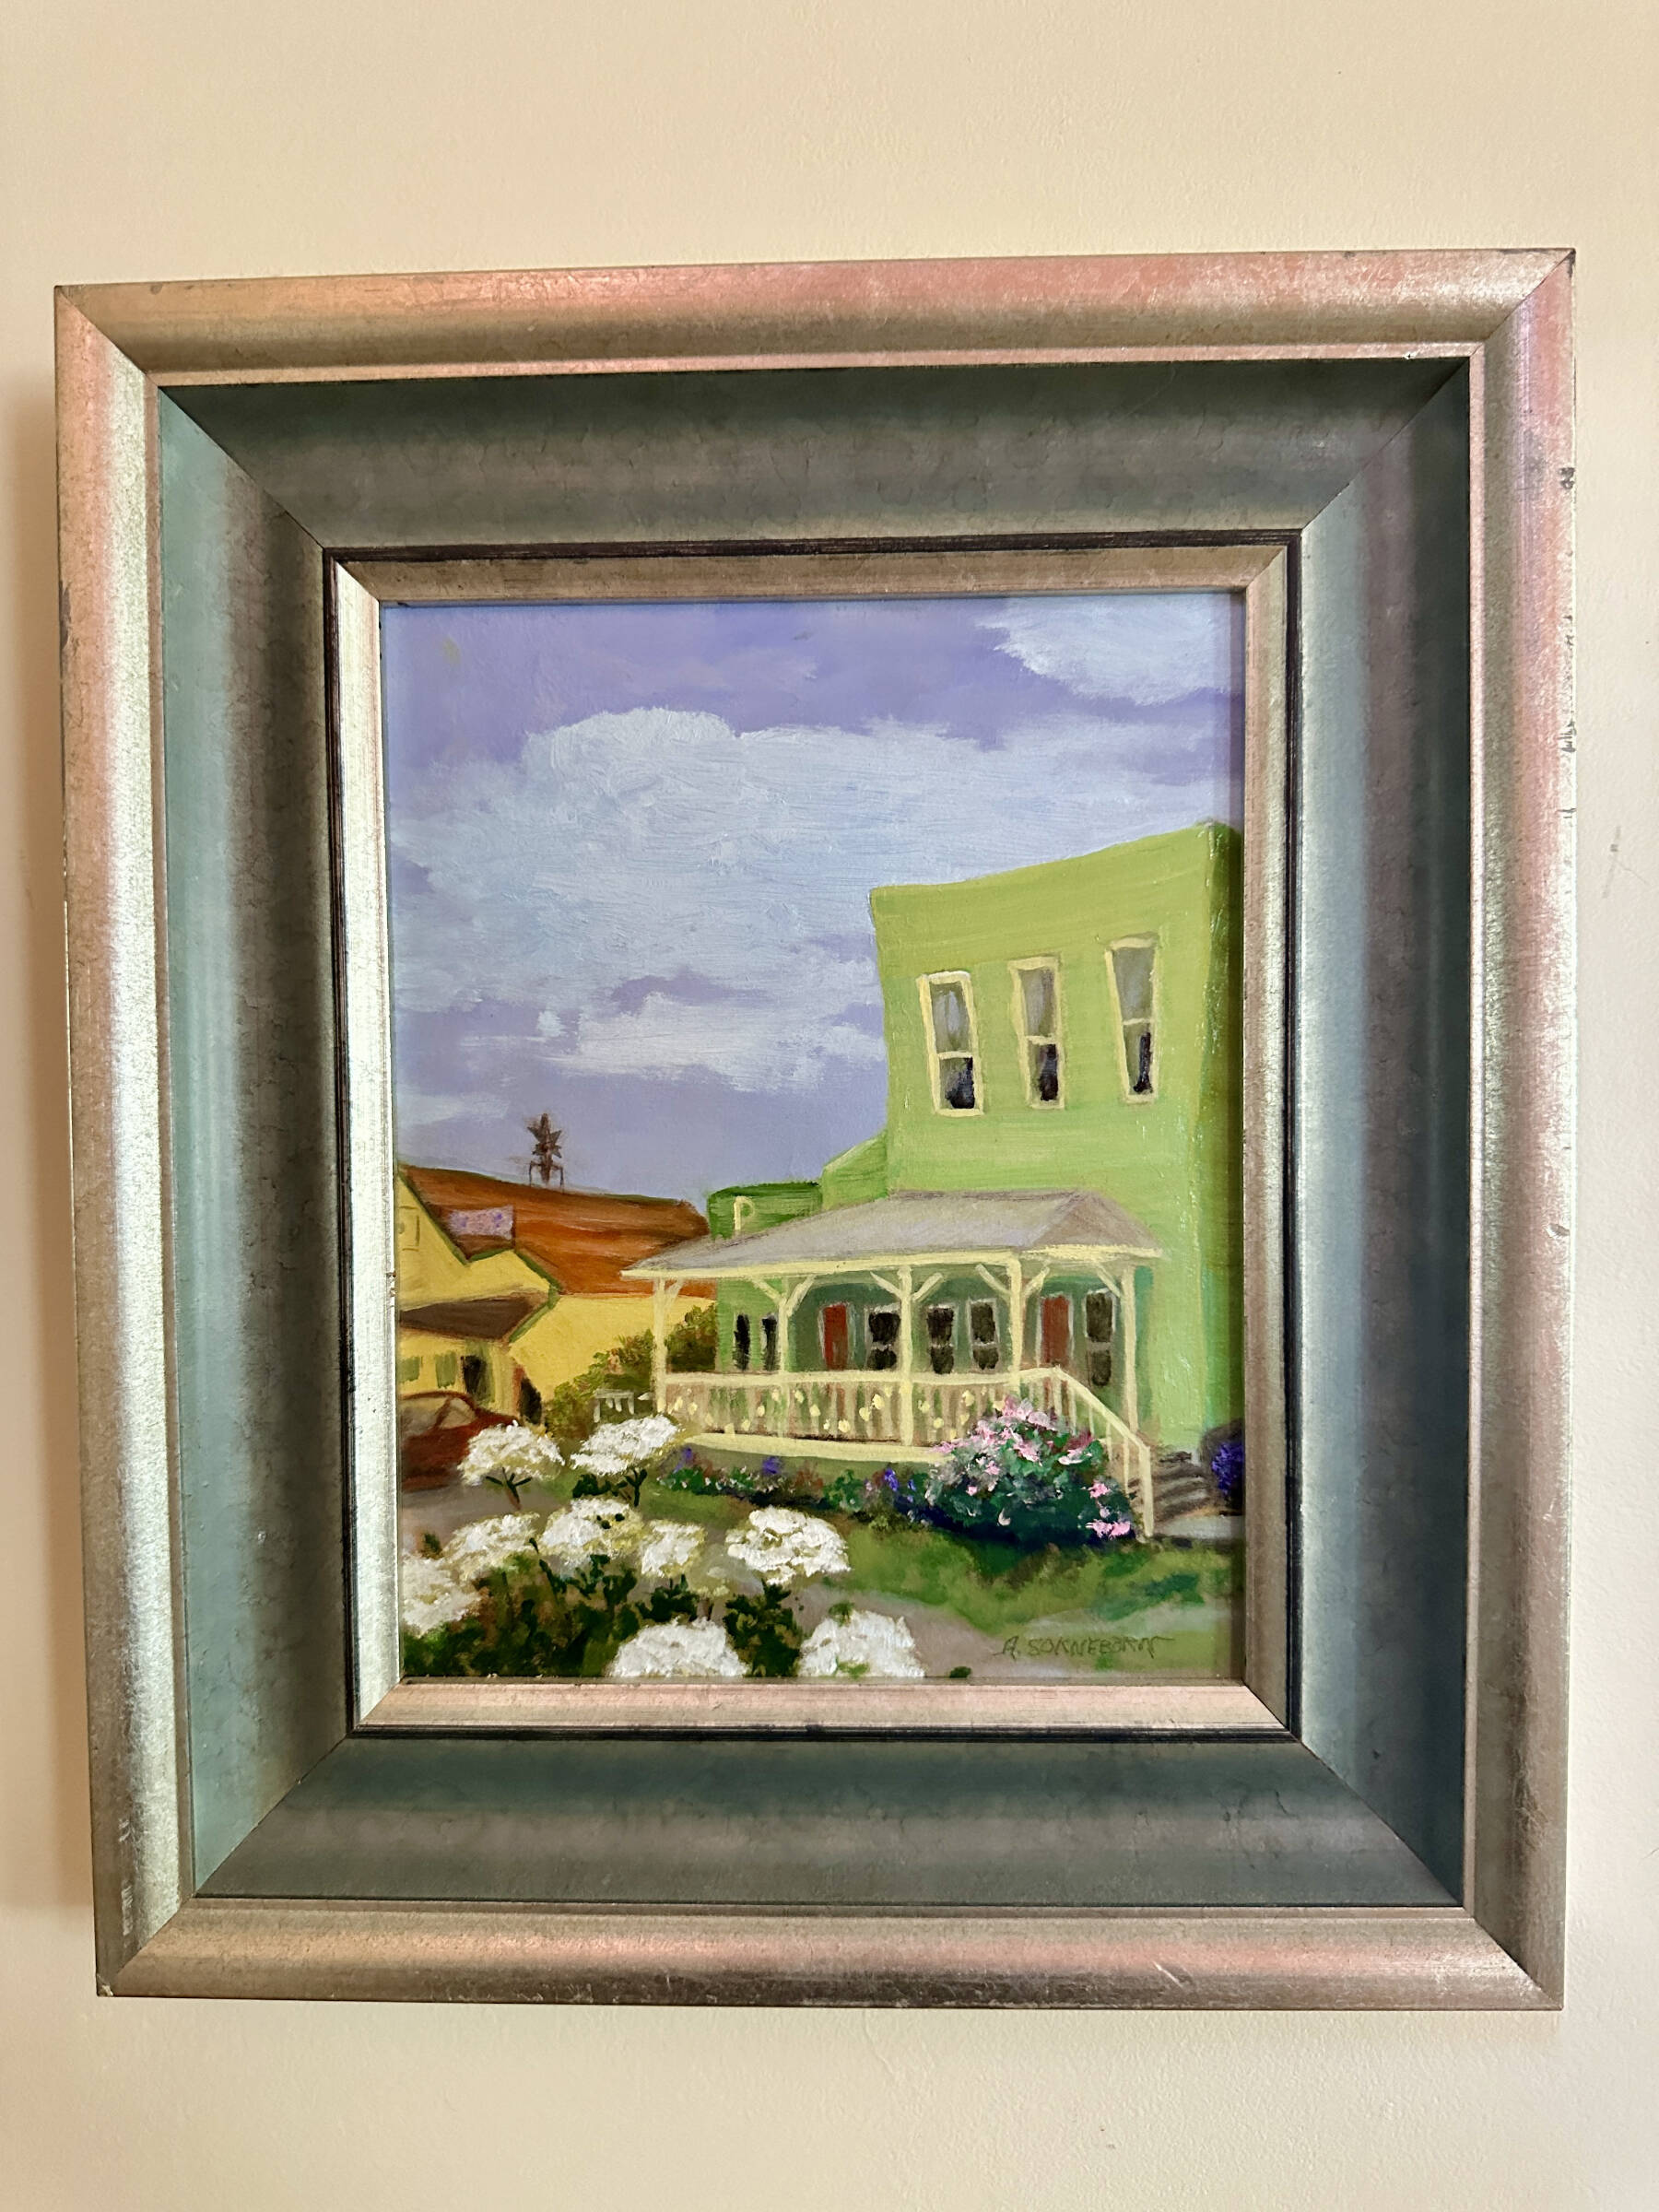 “Bunnell Street Arts Center” by Alexandra Sonneborn was painted in 2012. Photo by Christina Whiting